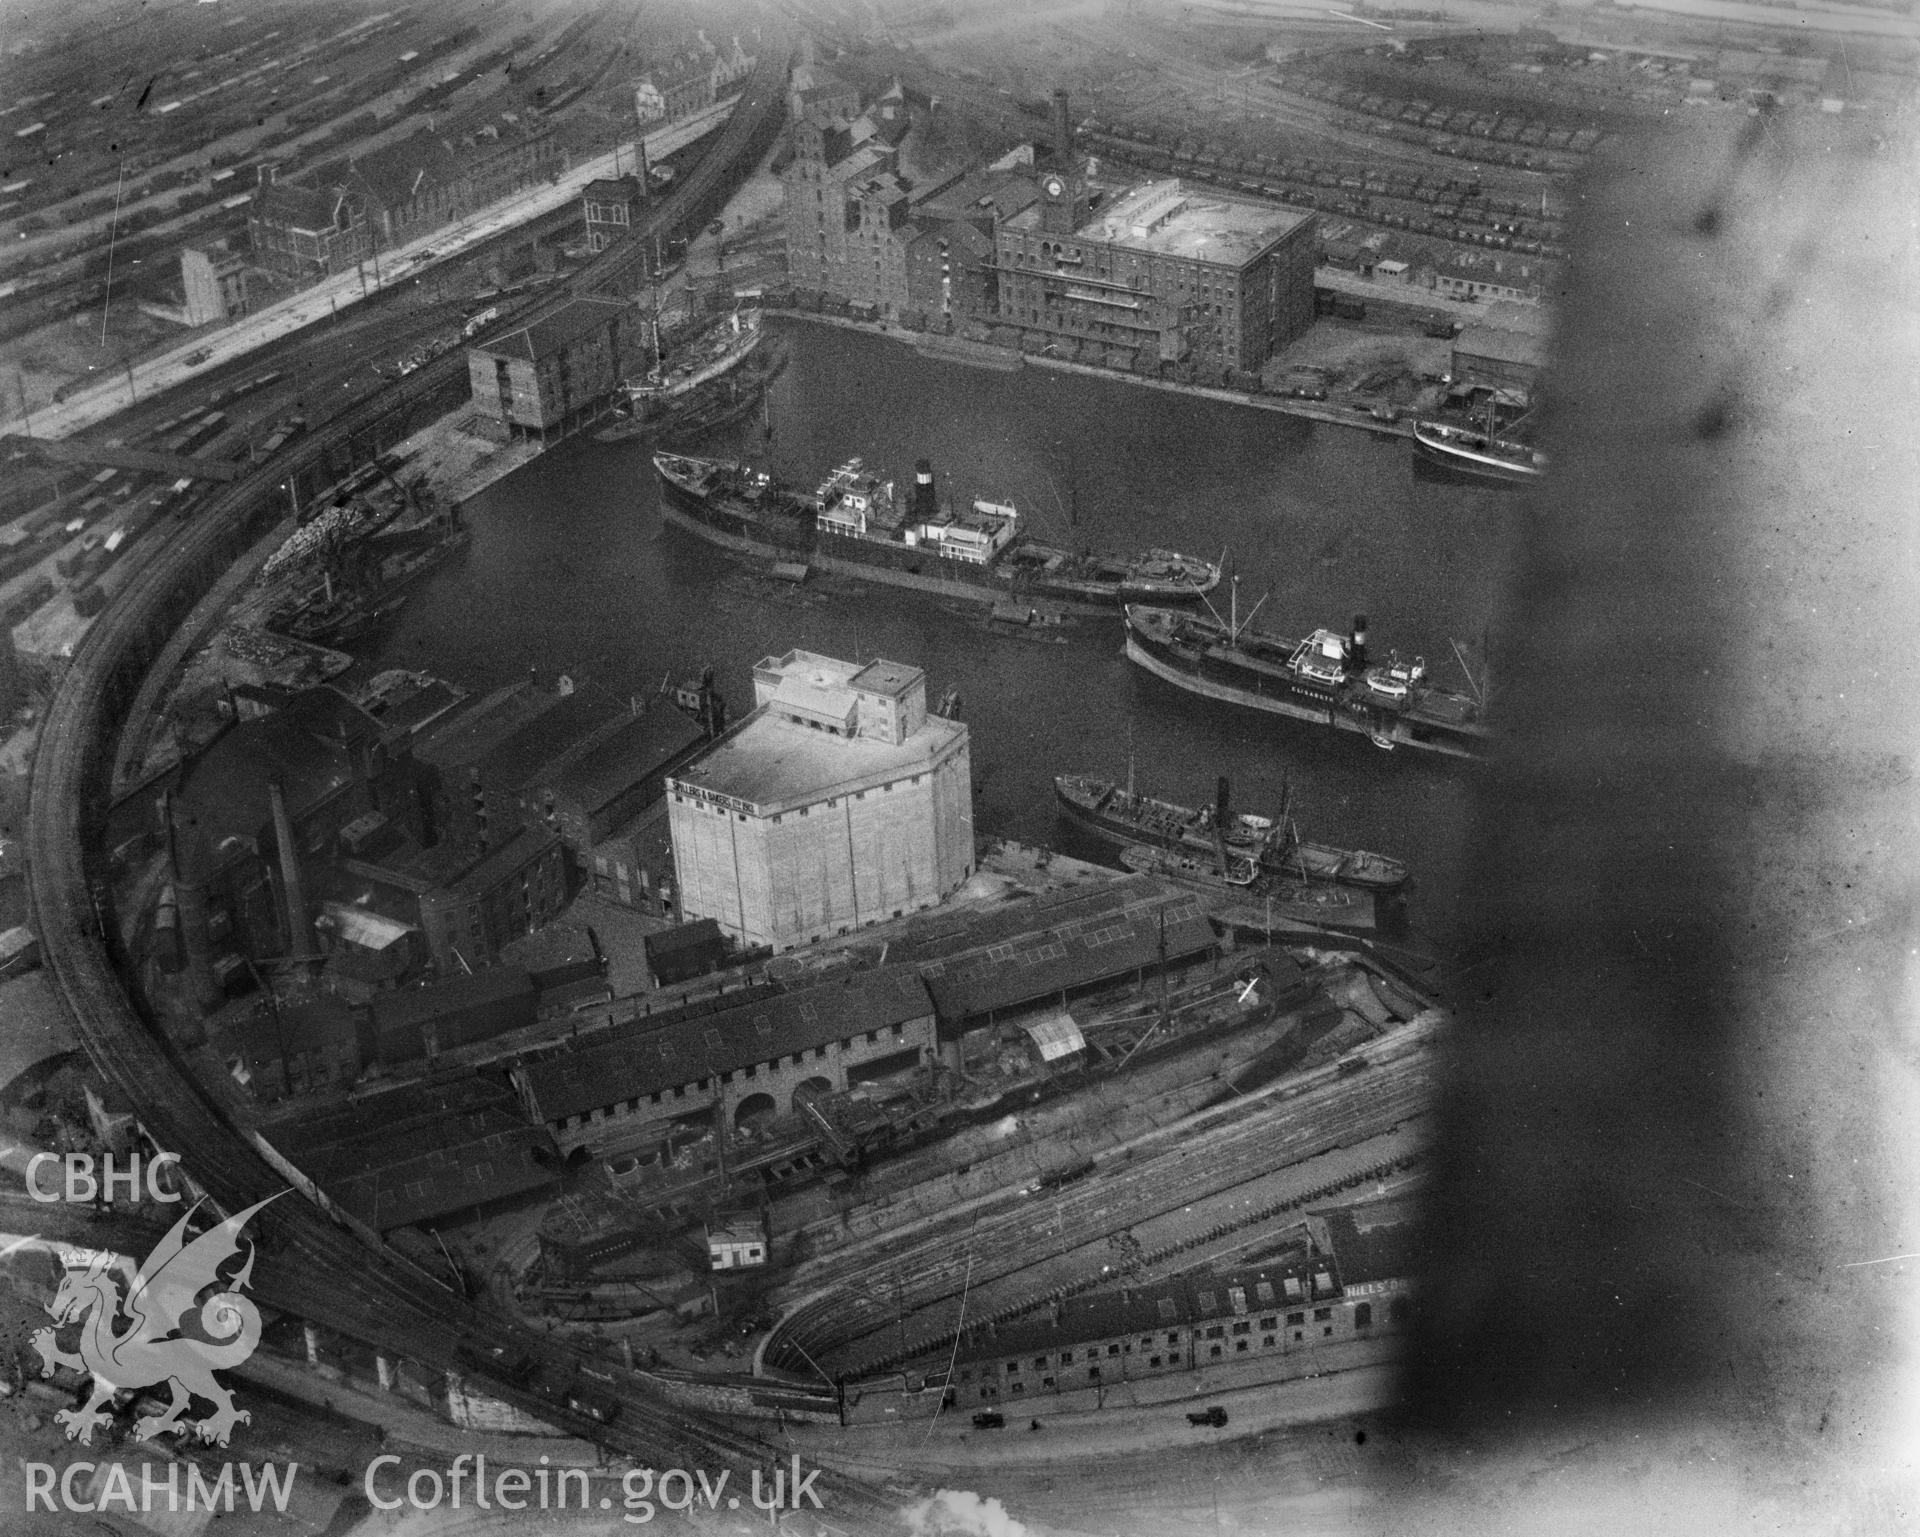 View of Cardiff East Bute Dock showing new Spillers biscuit factory, oblique aerial view. 5?x4? black and white glass plate negative.